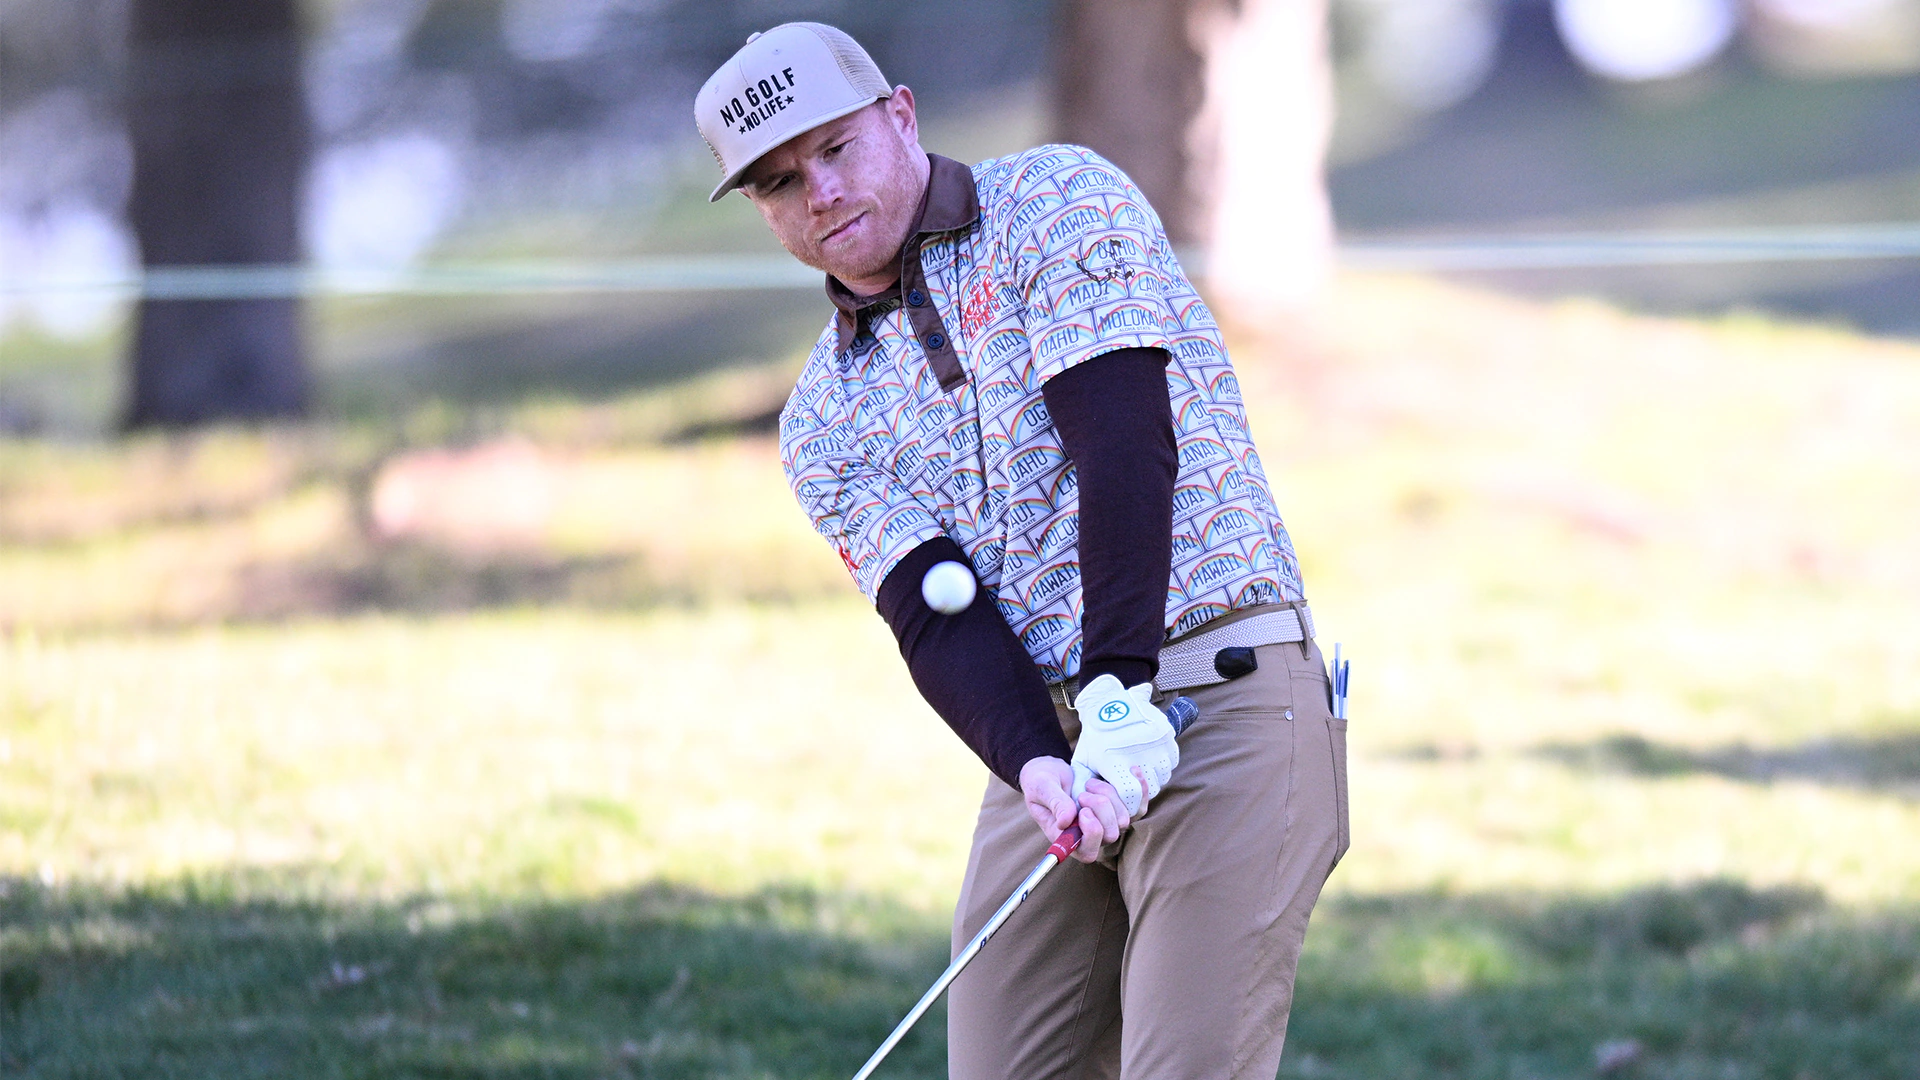 Canelo Alvarez could turn his love of golf into career after his boxing days end